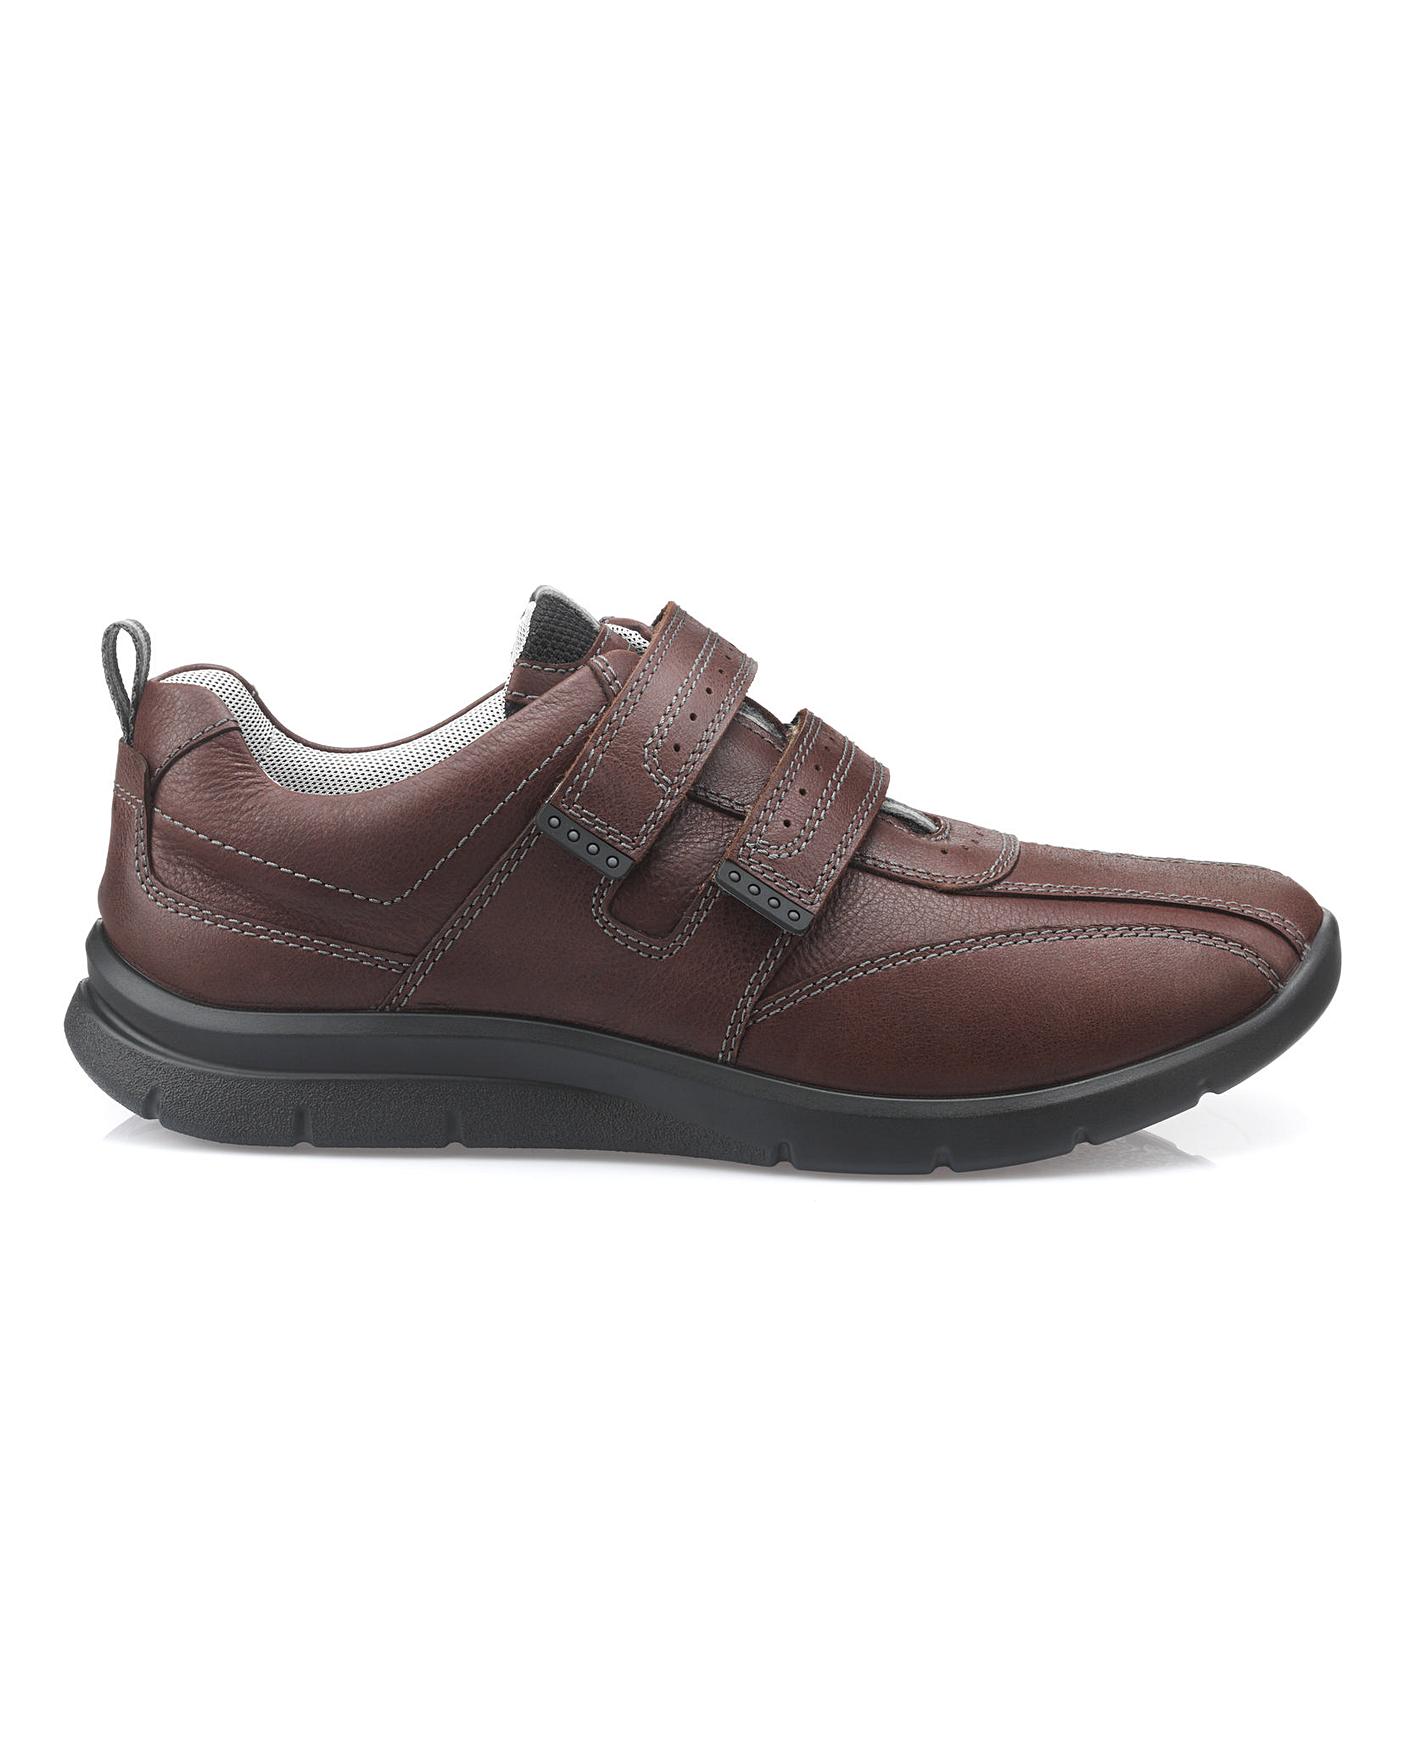 hotter men's casual shoes